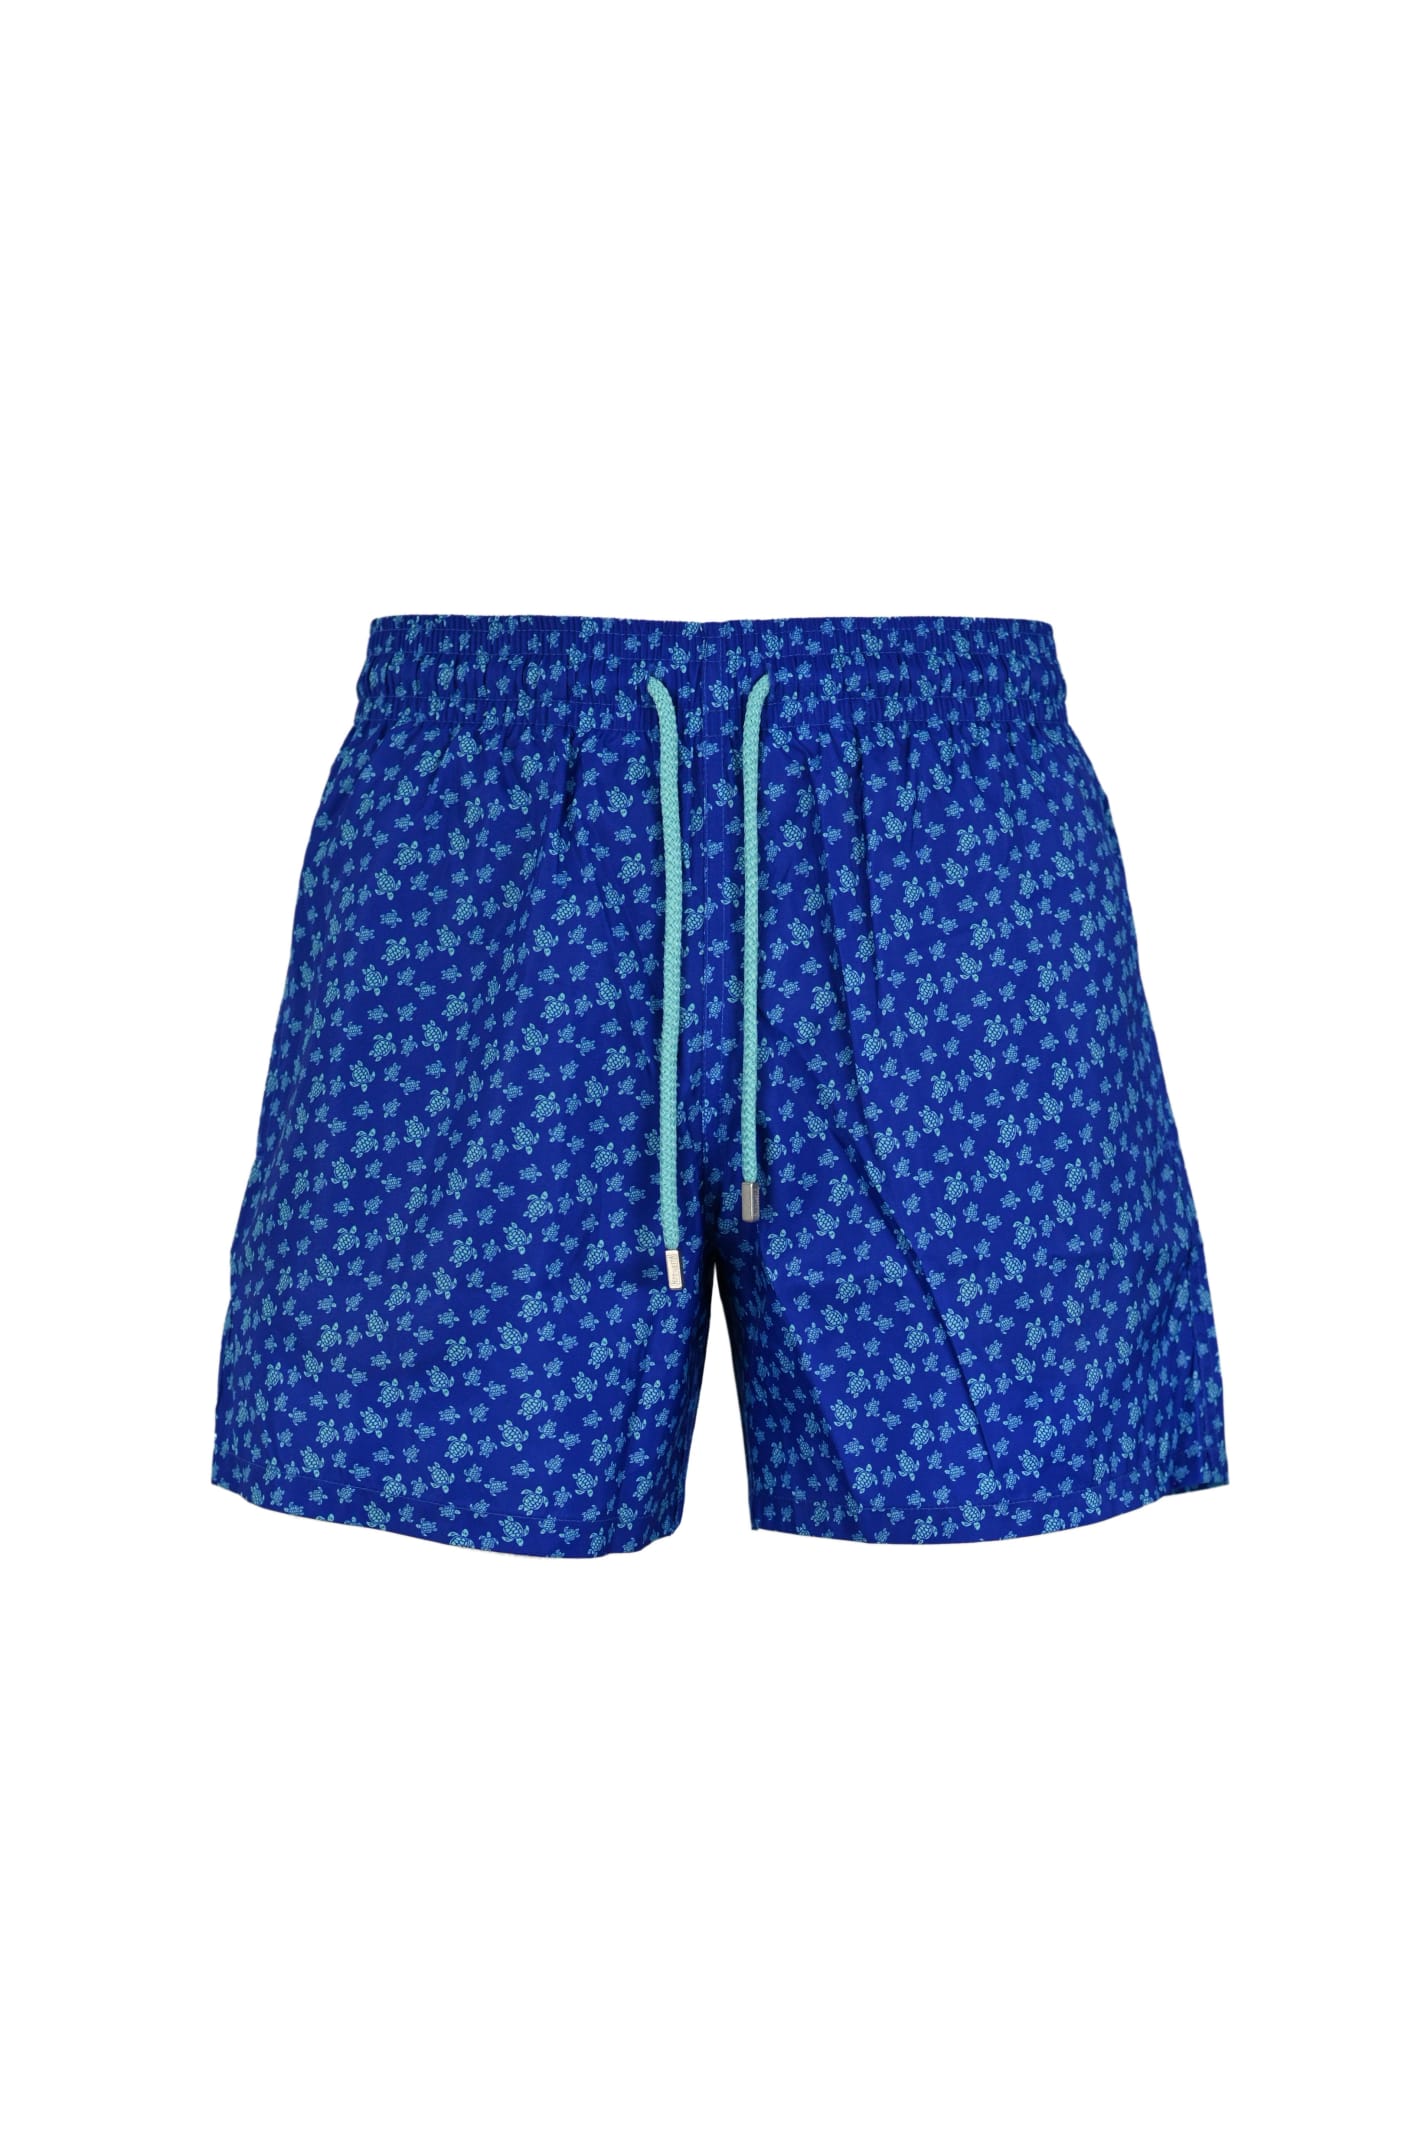 Vilebrequin Micro Ronde Des Tortues Ultra-light And Packable Mens Swim Trunks